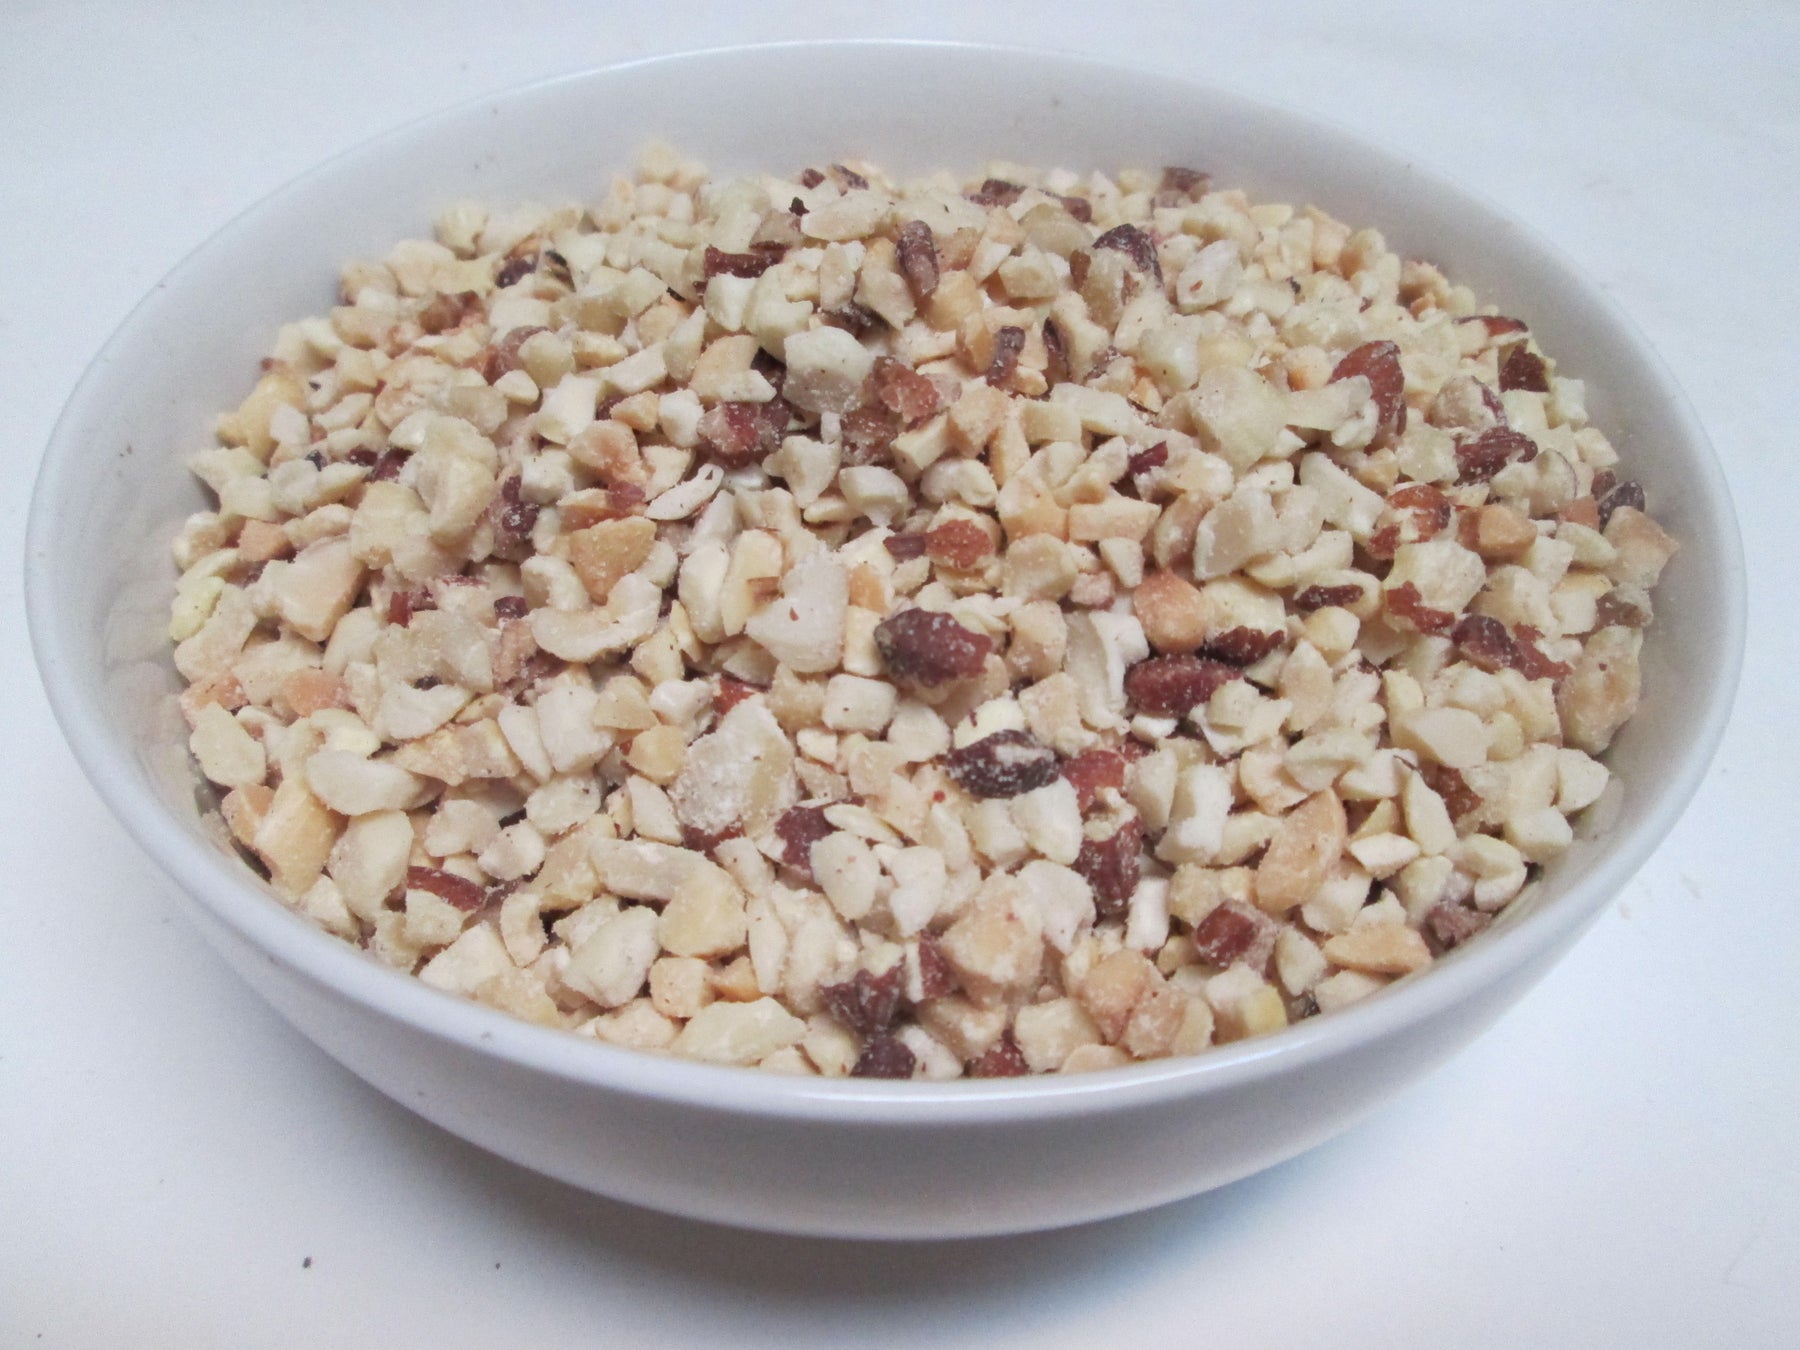 Chopped Nut Toppings